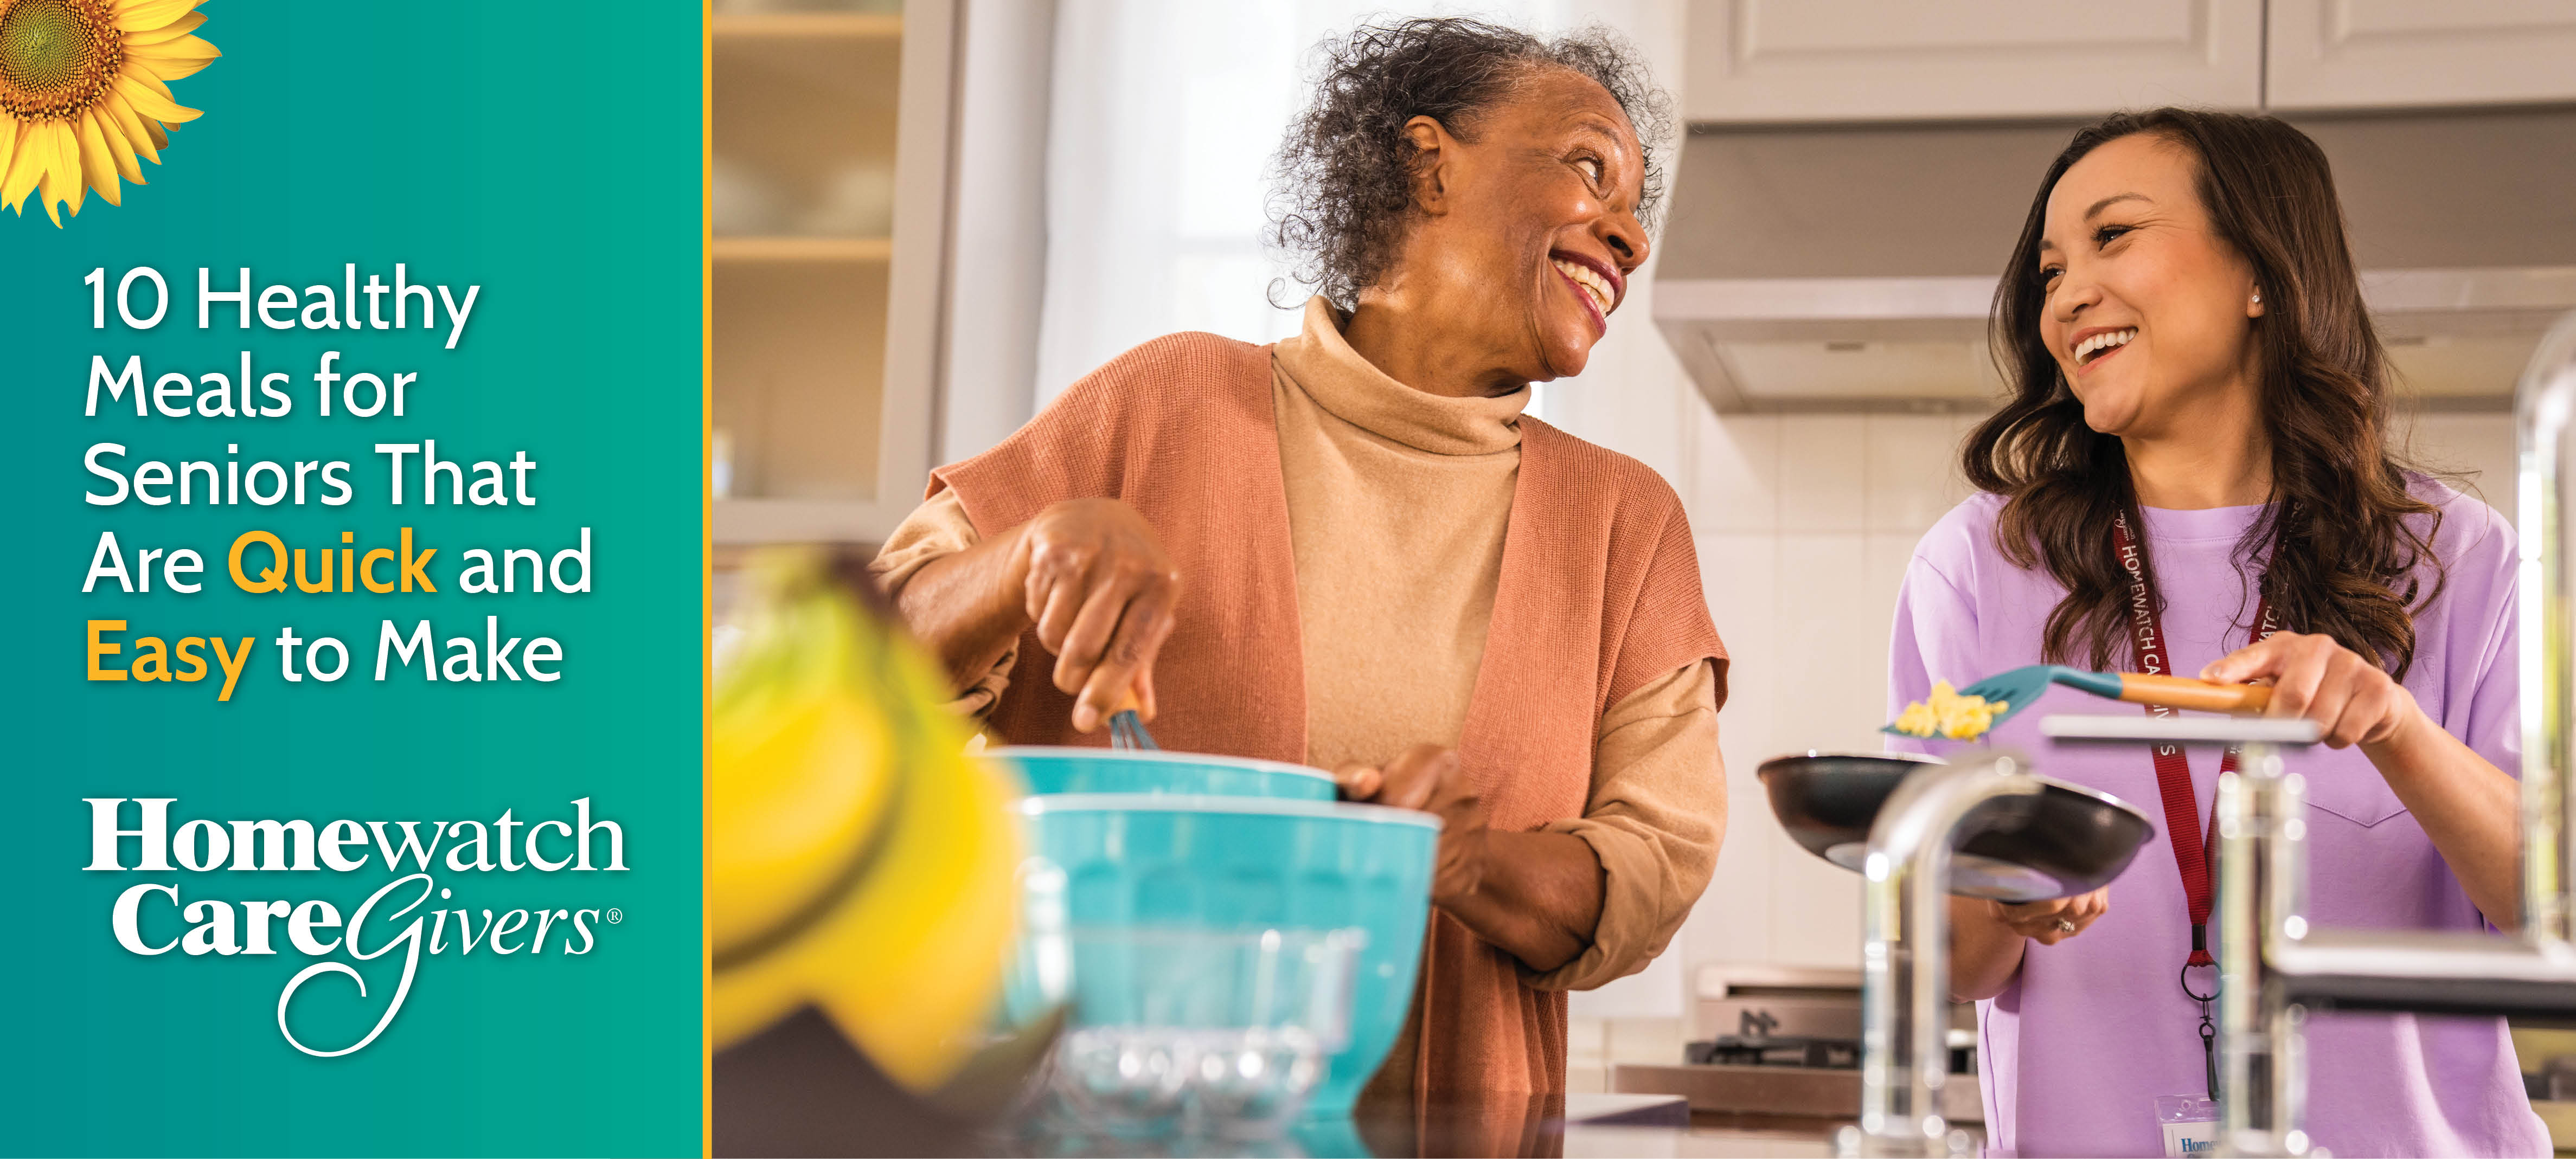 10-healthy-meals-for-seniors-that-are-quick-and-easy-to-make